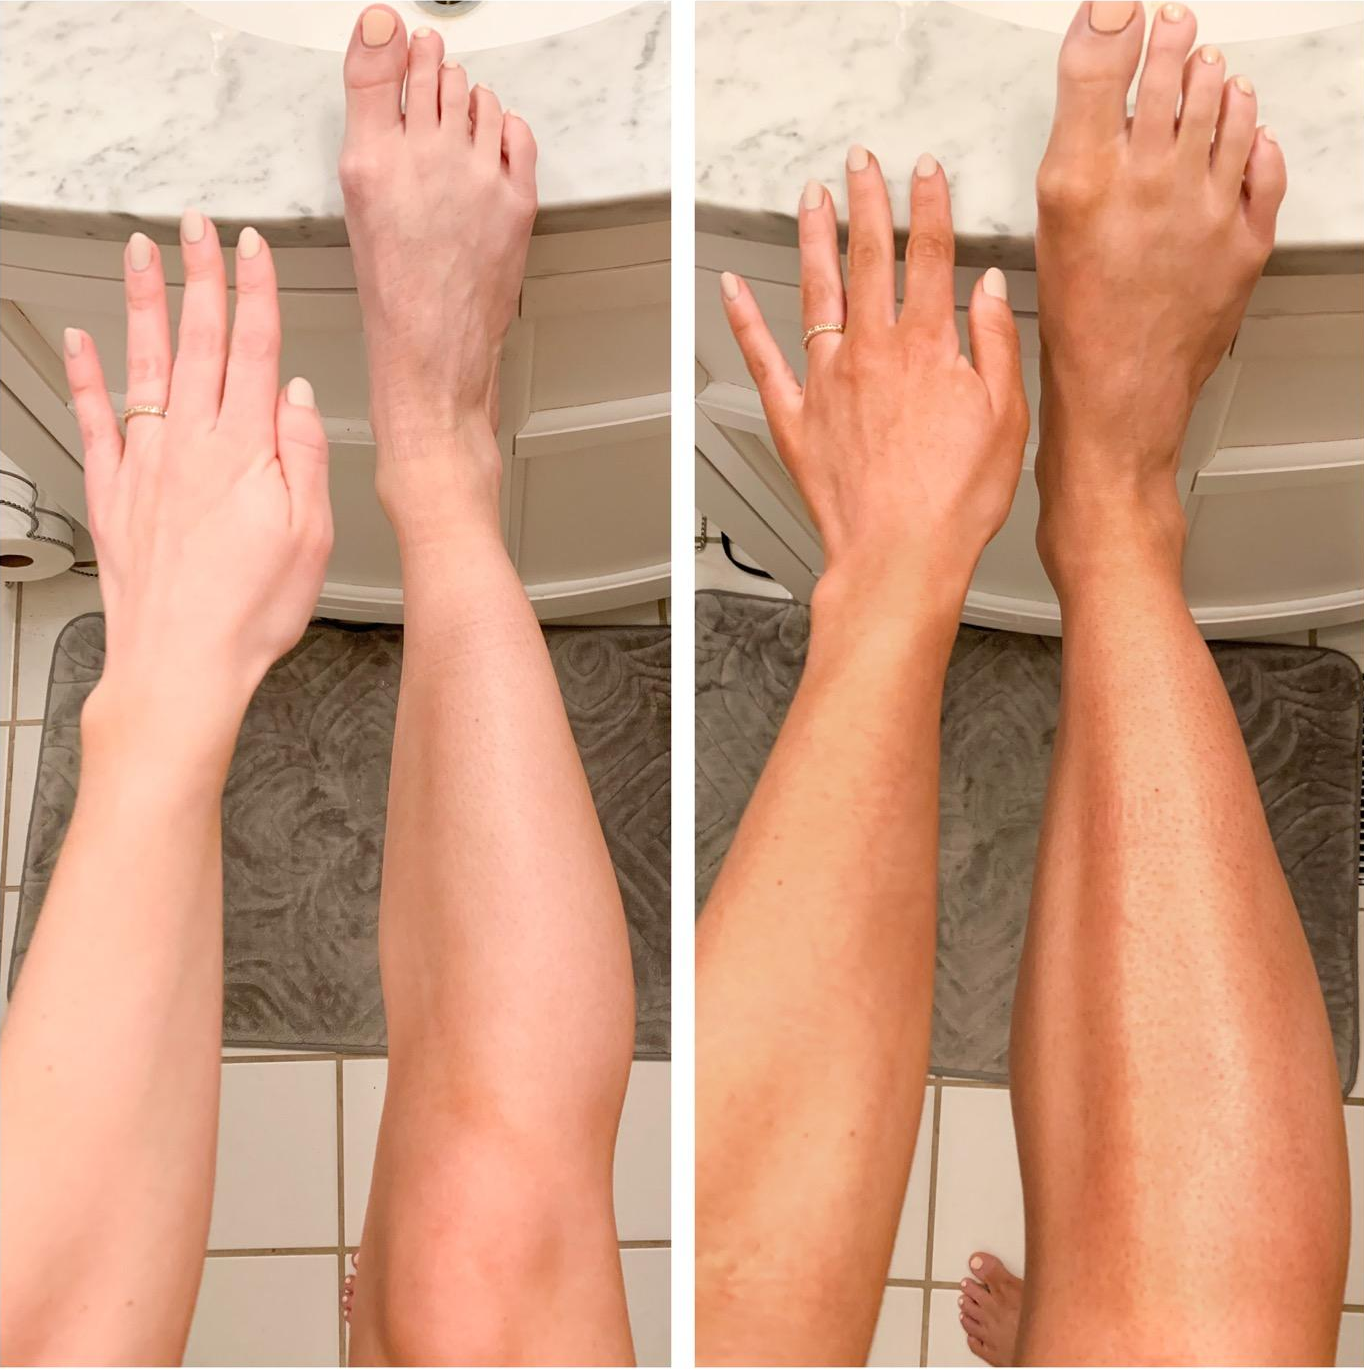 before and after images of a reviewer's pale skin becoming darker